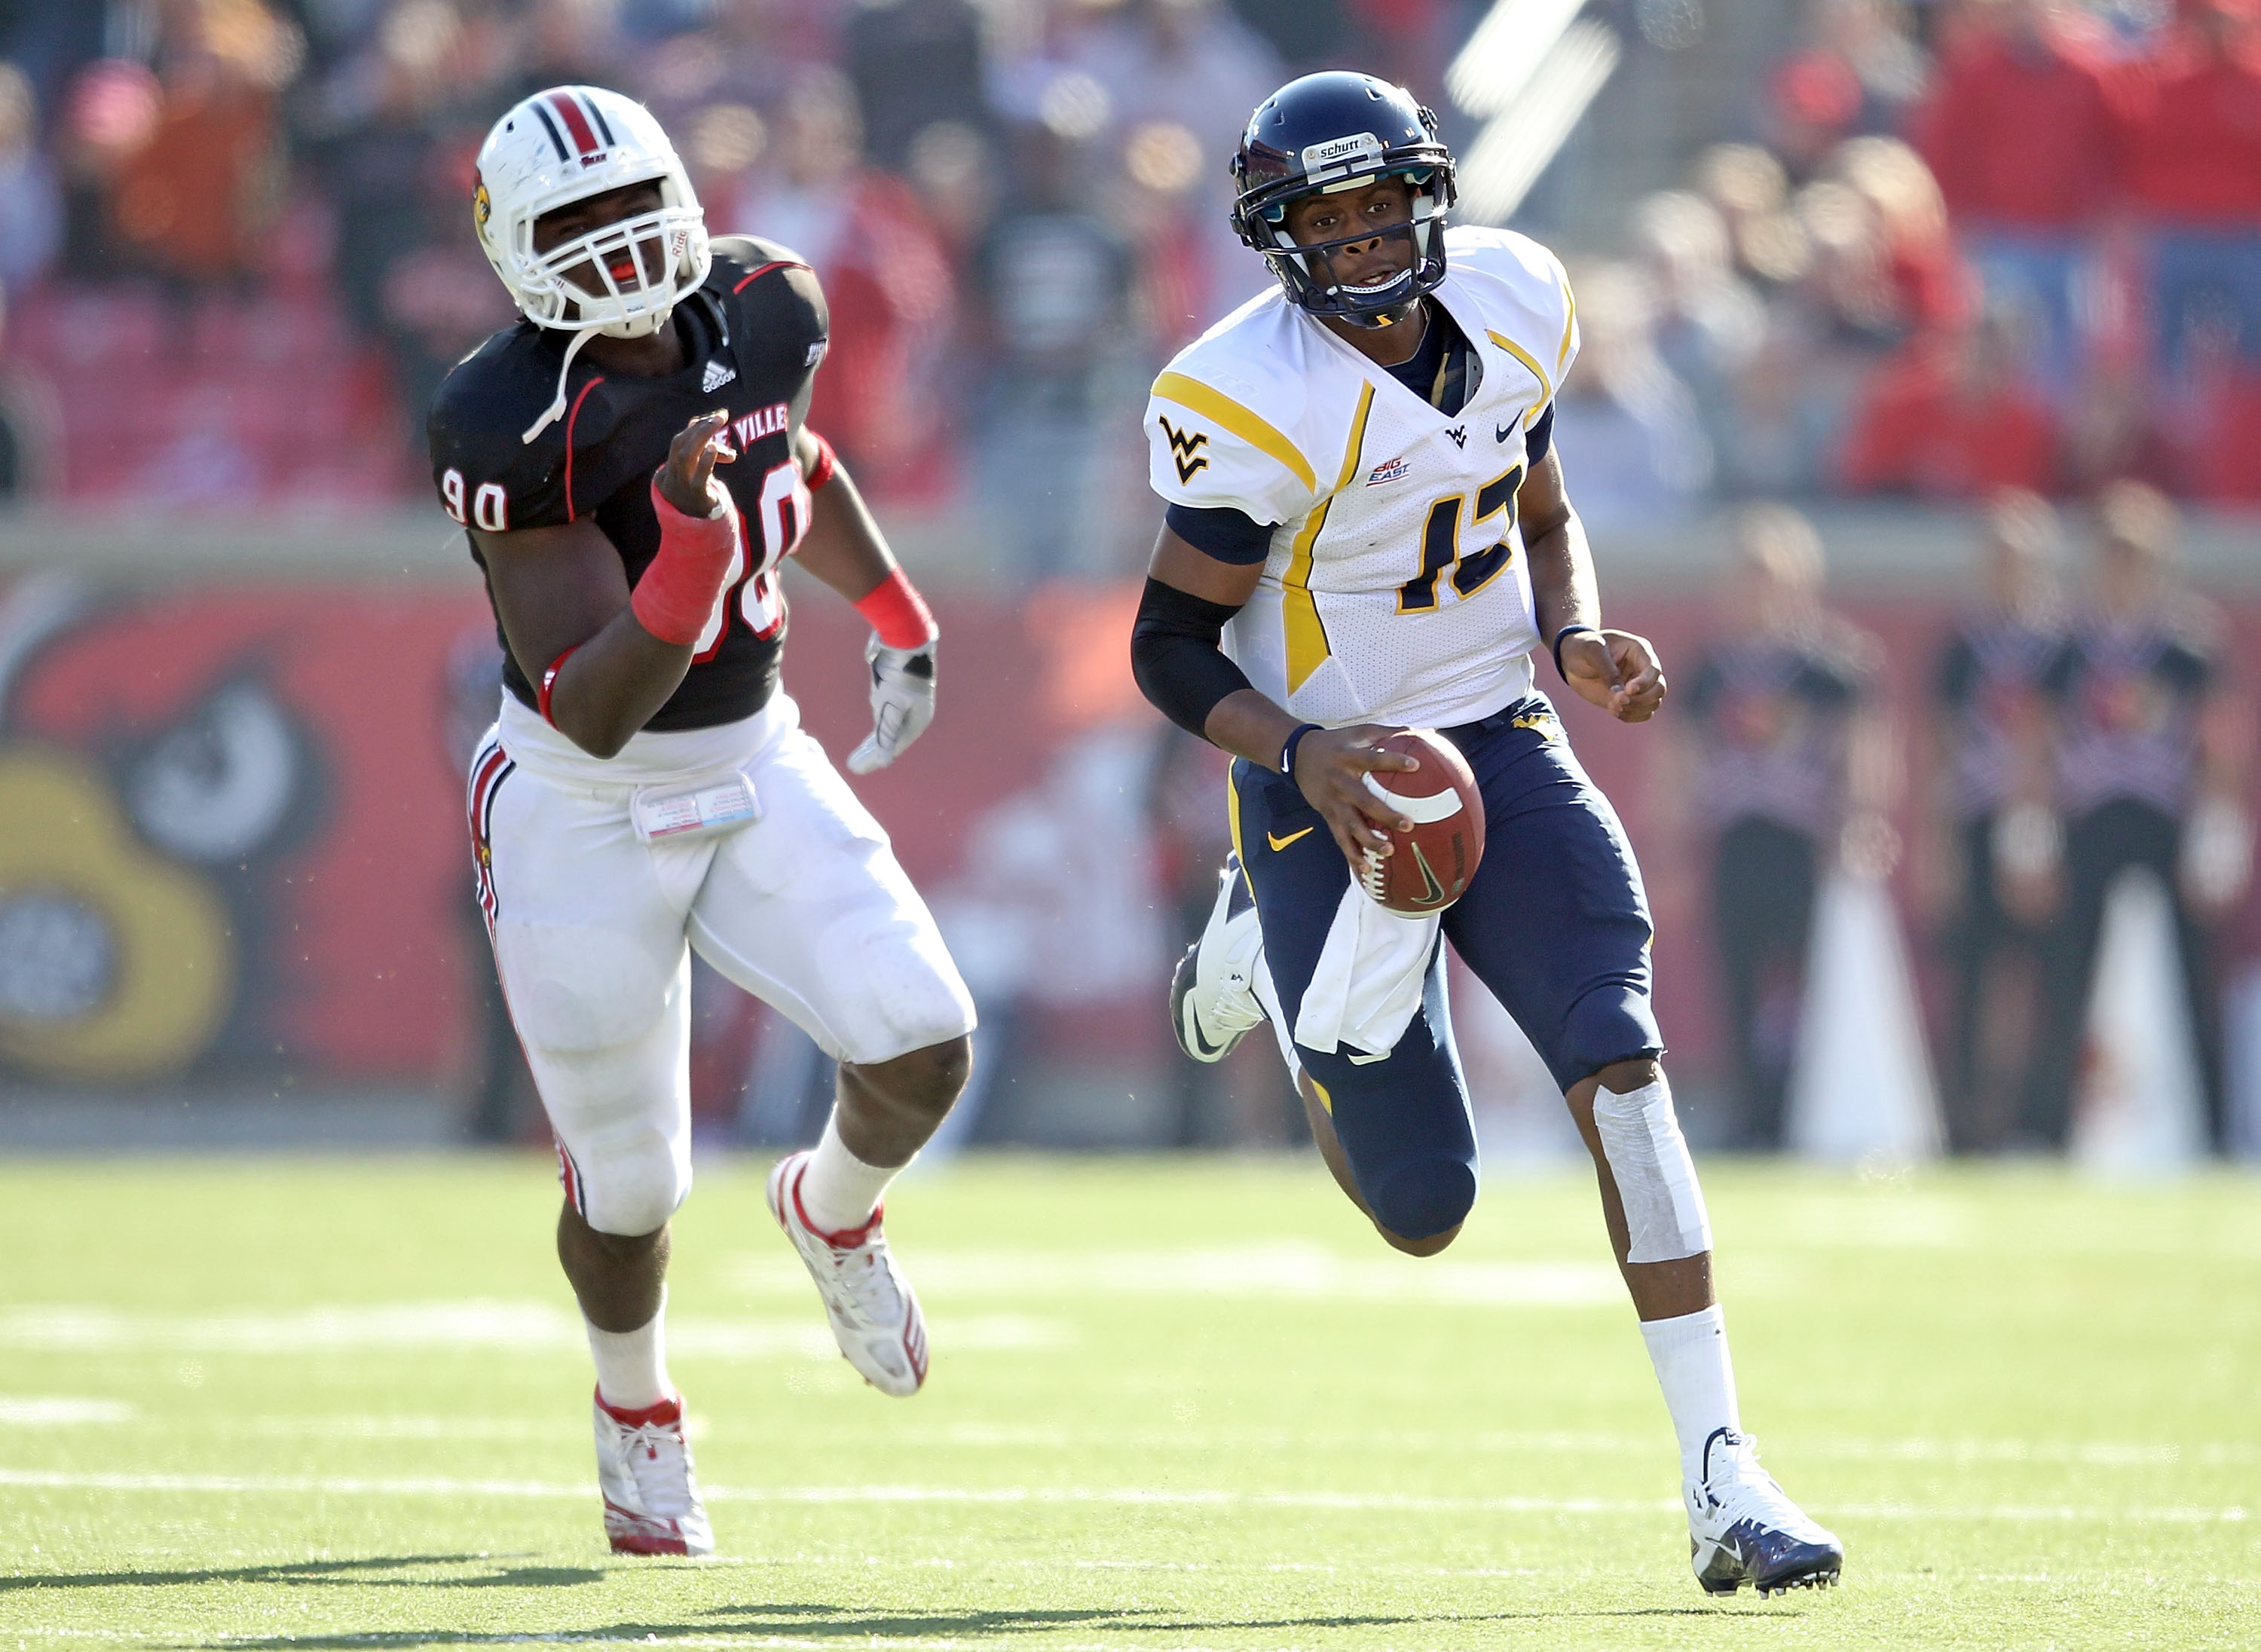 LOUISVILLE, KY - NOVEMBER 20:  Geno Smith#12 of the West Virginia Mountaineers runs with the ball during the Big East Conference game against the Louisville Cardinals at Papa John's Cardinal Stadium on November 20, 2010 in Louisville, Kentucky.  (Photo by